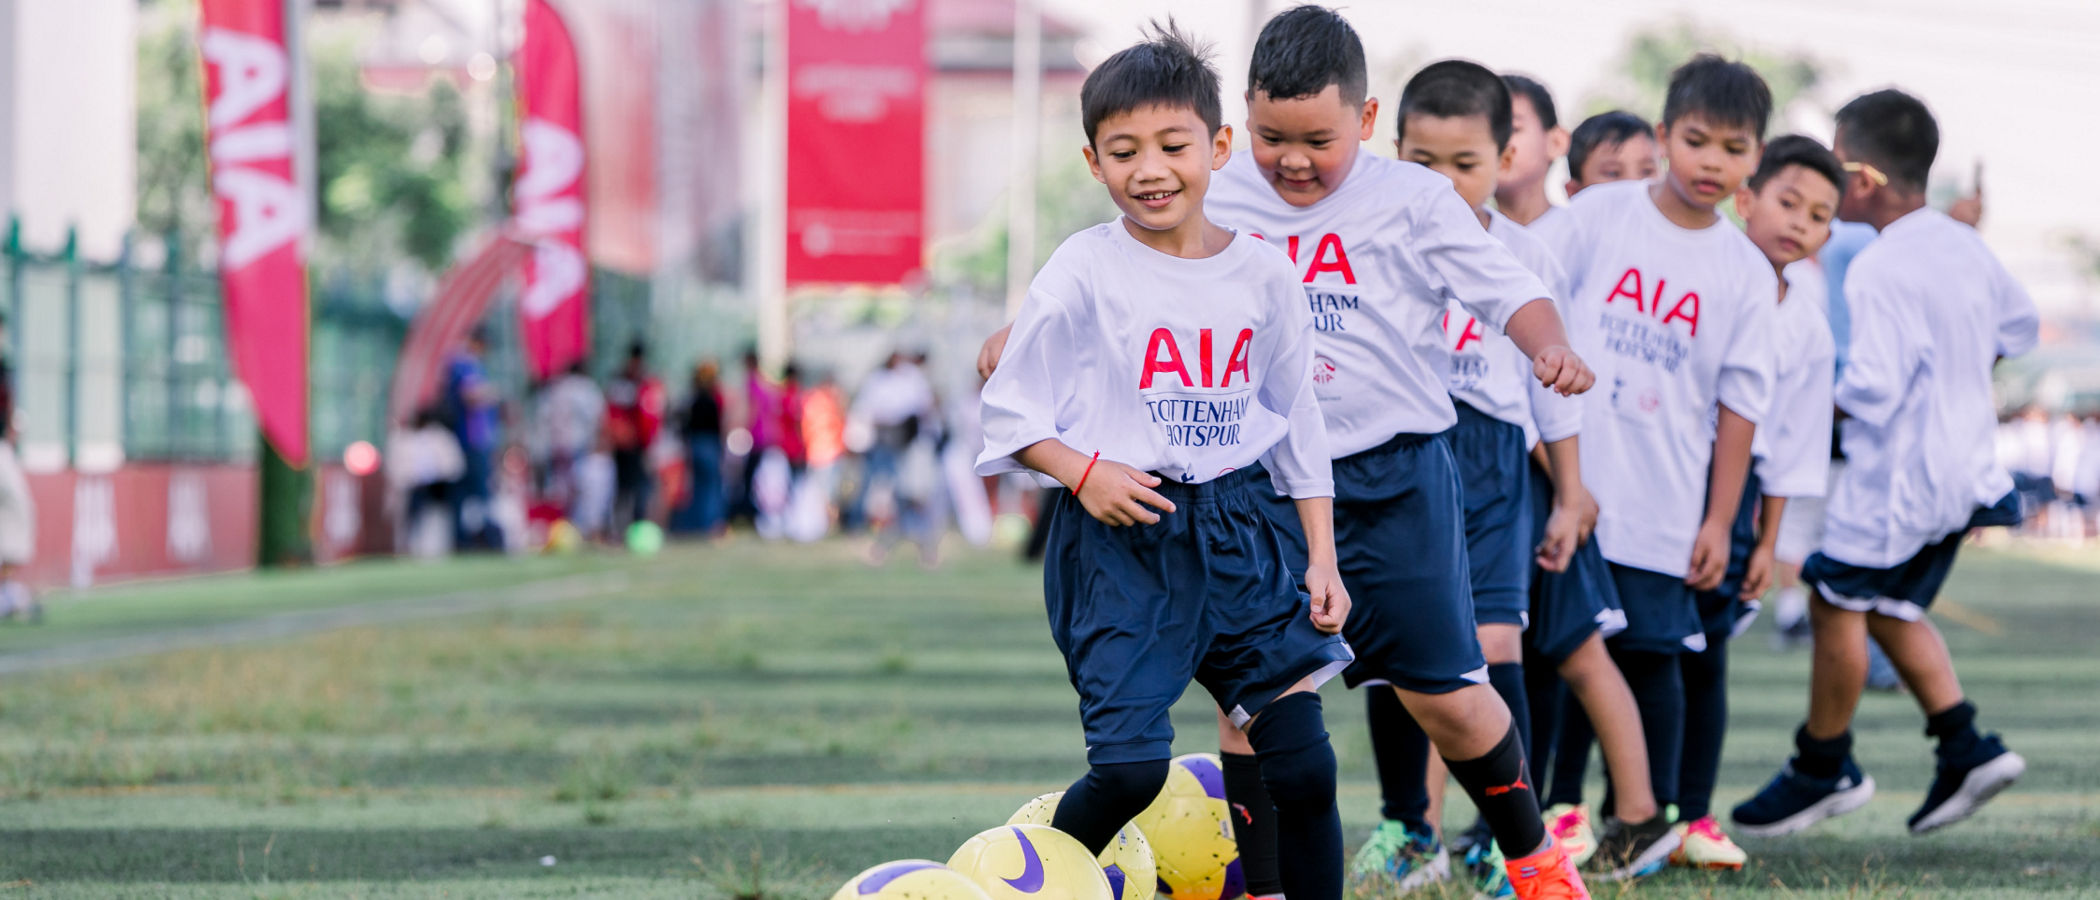 Engaging people through football and healthy living